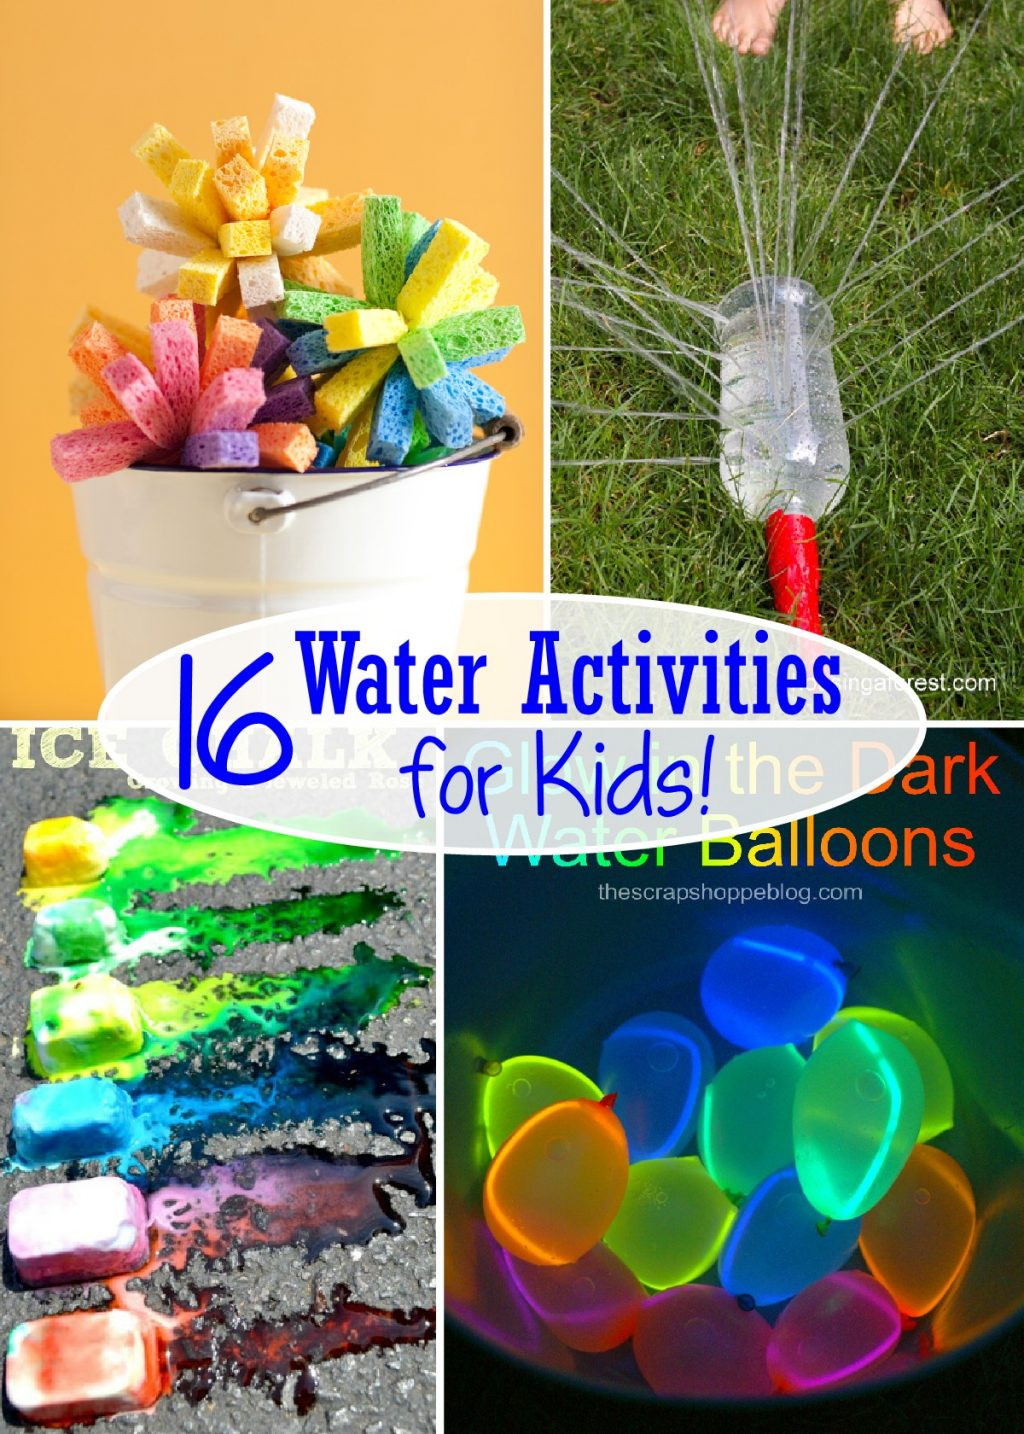 Water Crafts For Kids
 16 Water Activities for Kids The Scrap Shoppe